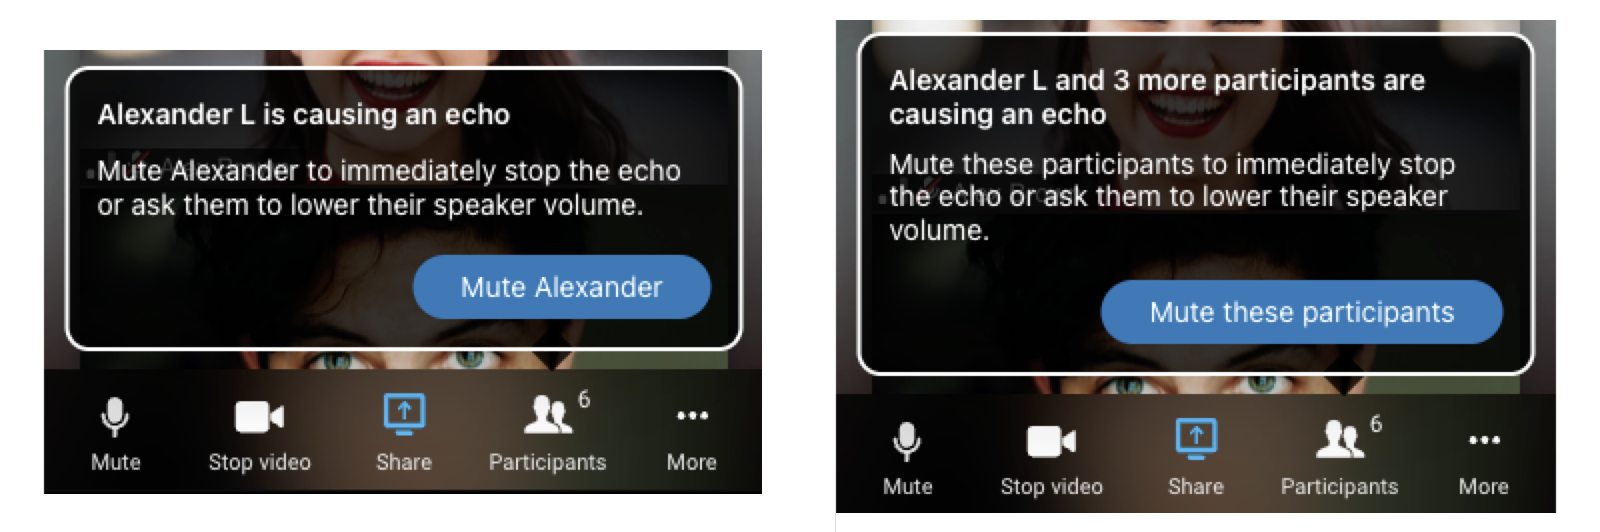 Echo detection in the mobile app